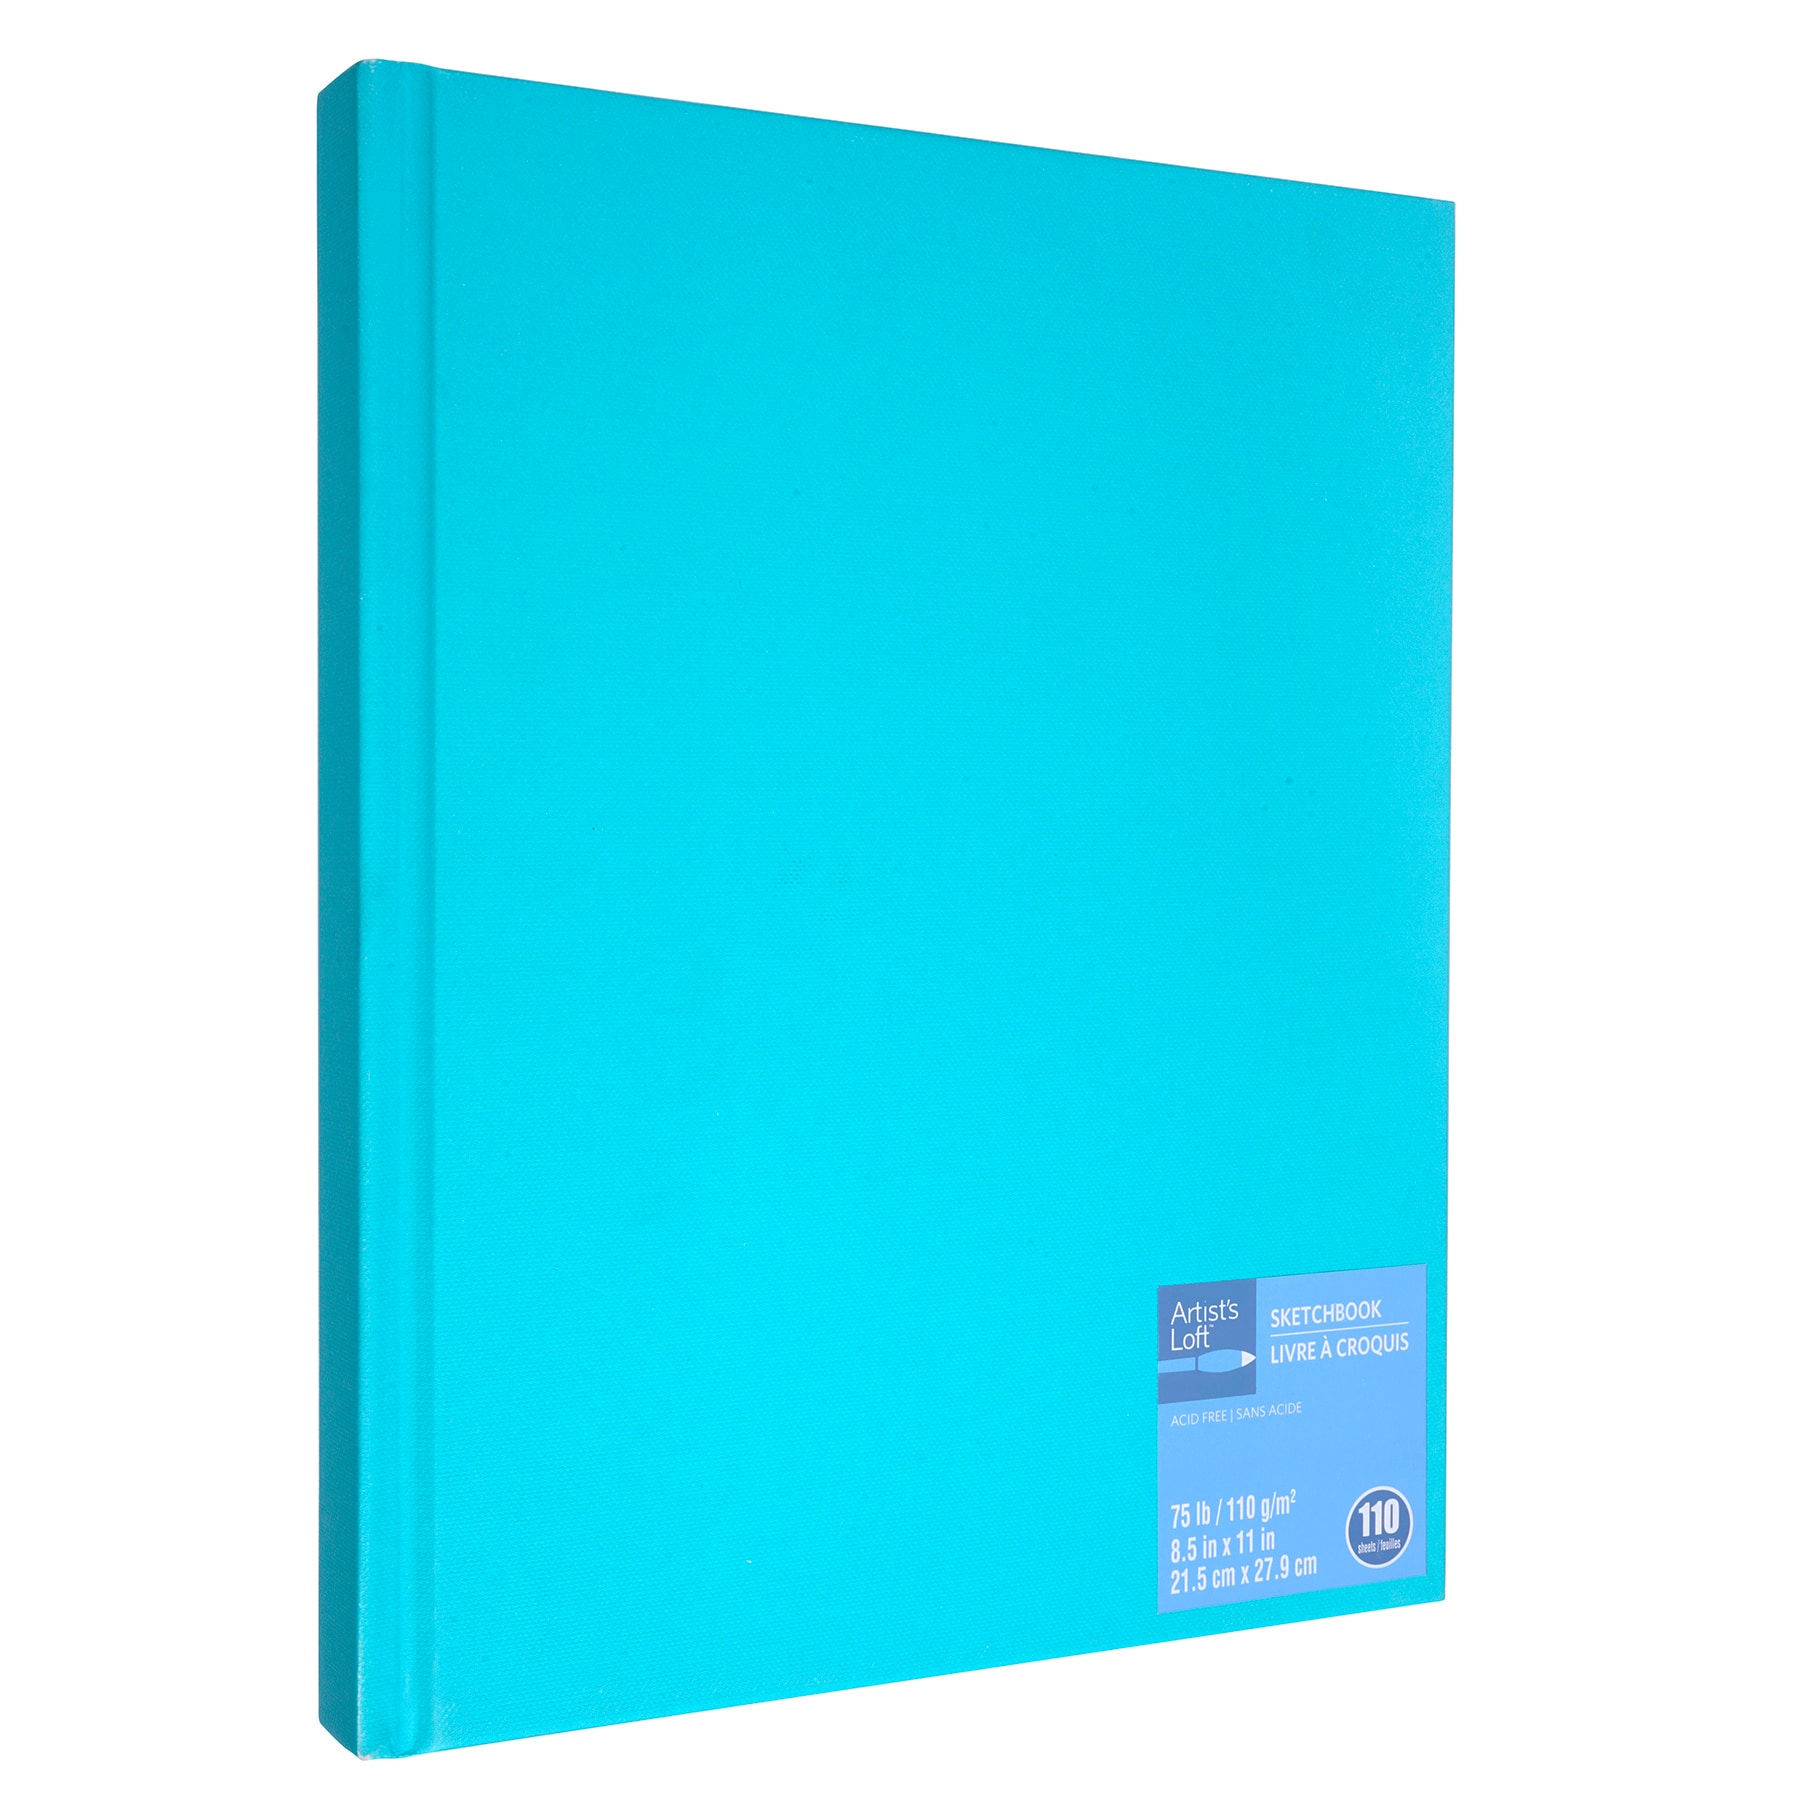  Blue Hardbound Sketchbook by Artist's Loft - Acid Free and  Smudge Resistant Paper, Sketch Pad for Drawing, Sketching, Writing - 1 Pack  : Arts, Crafts & Sewing